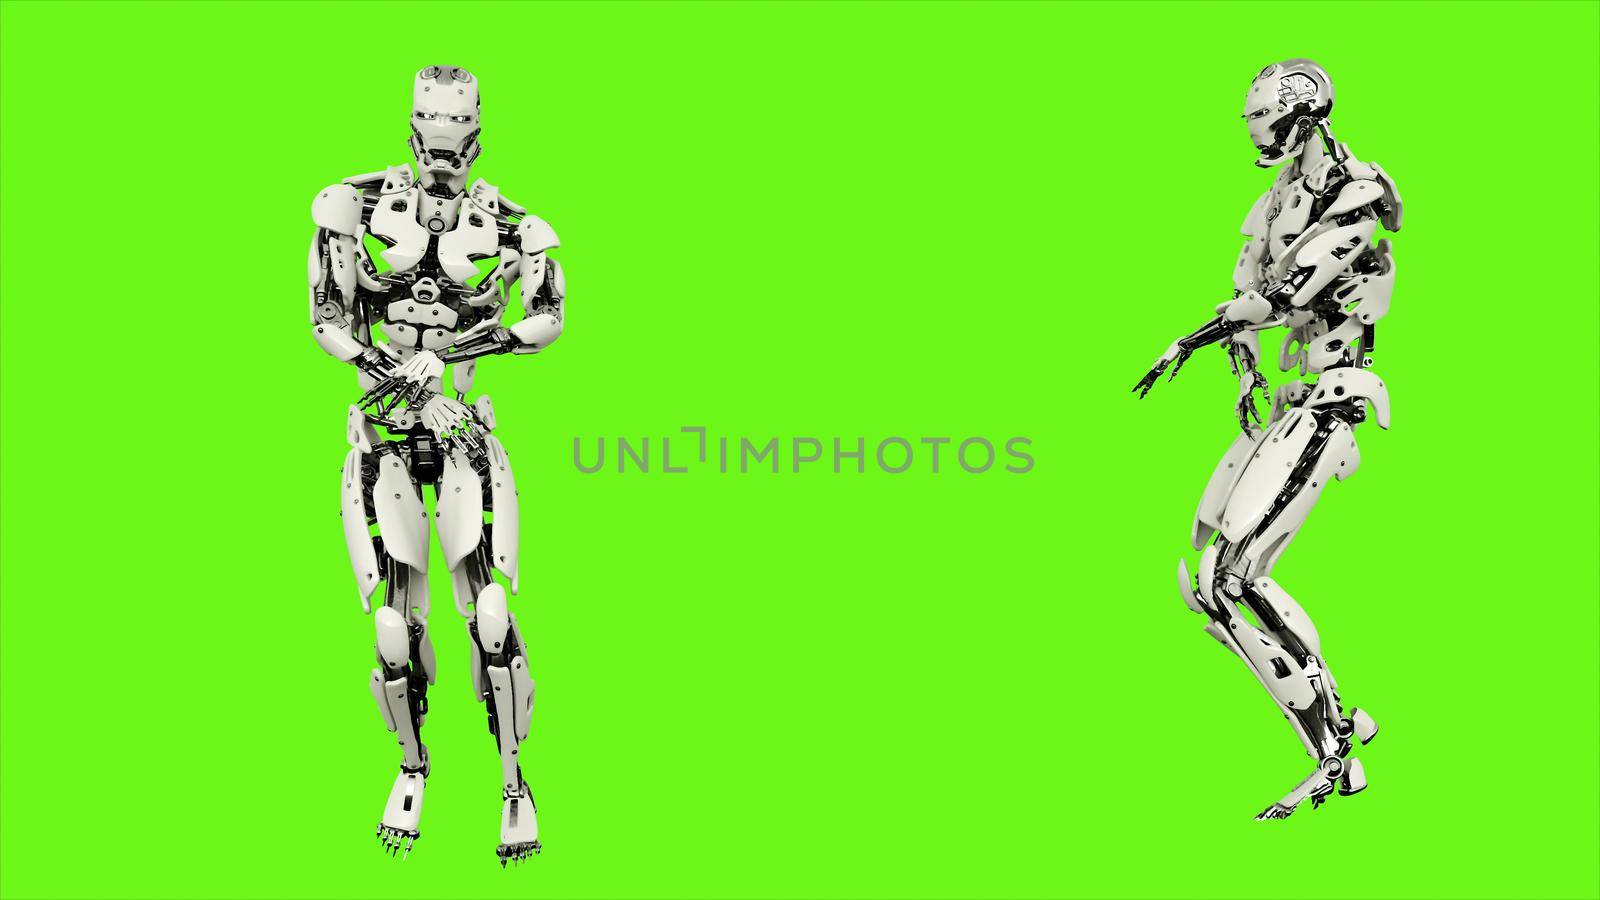 Robot android is Robot android is dancing hip hop. Illustration on green screen background.